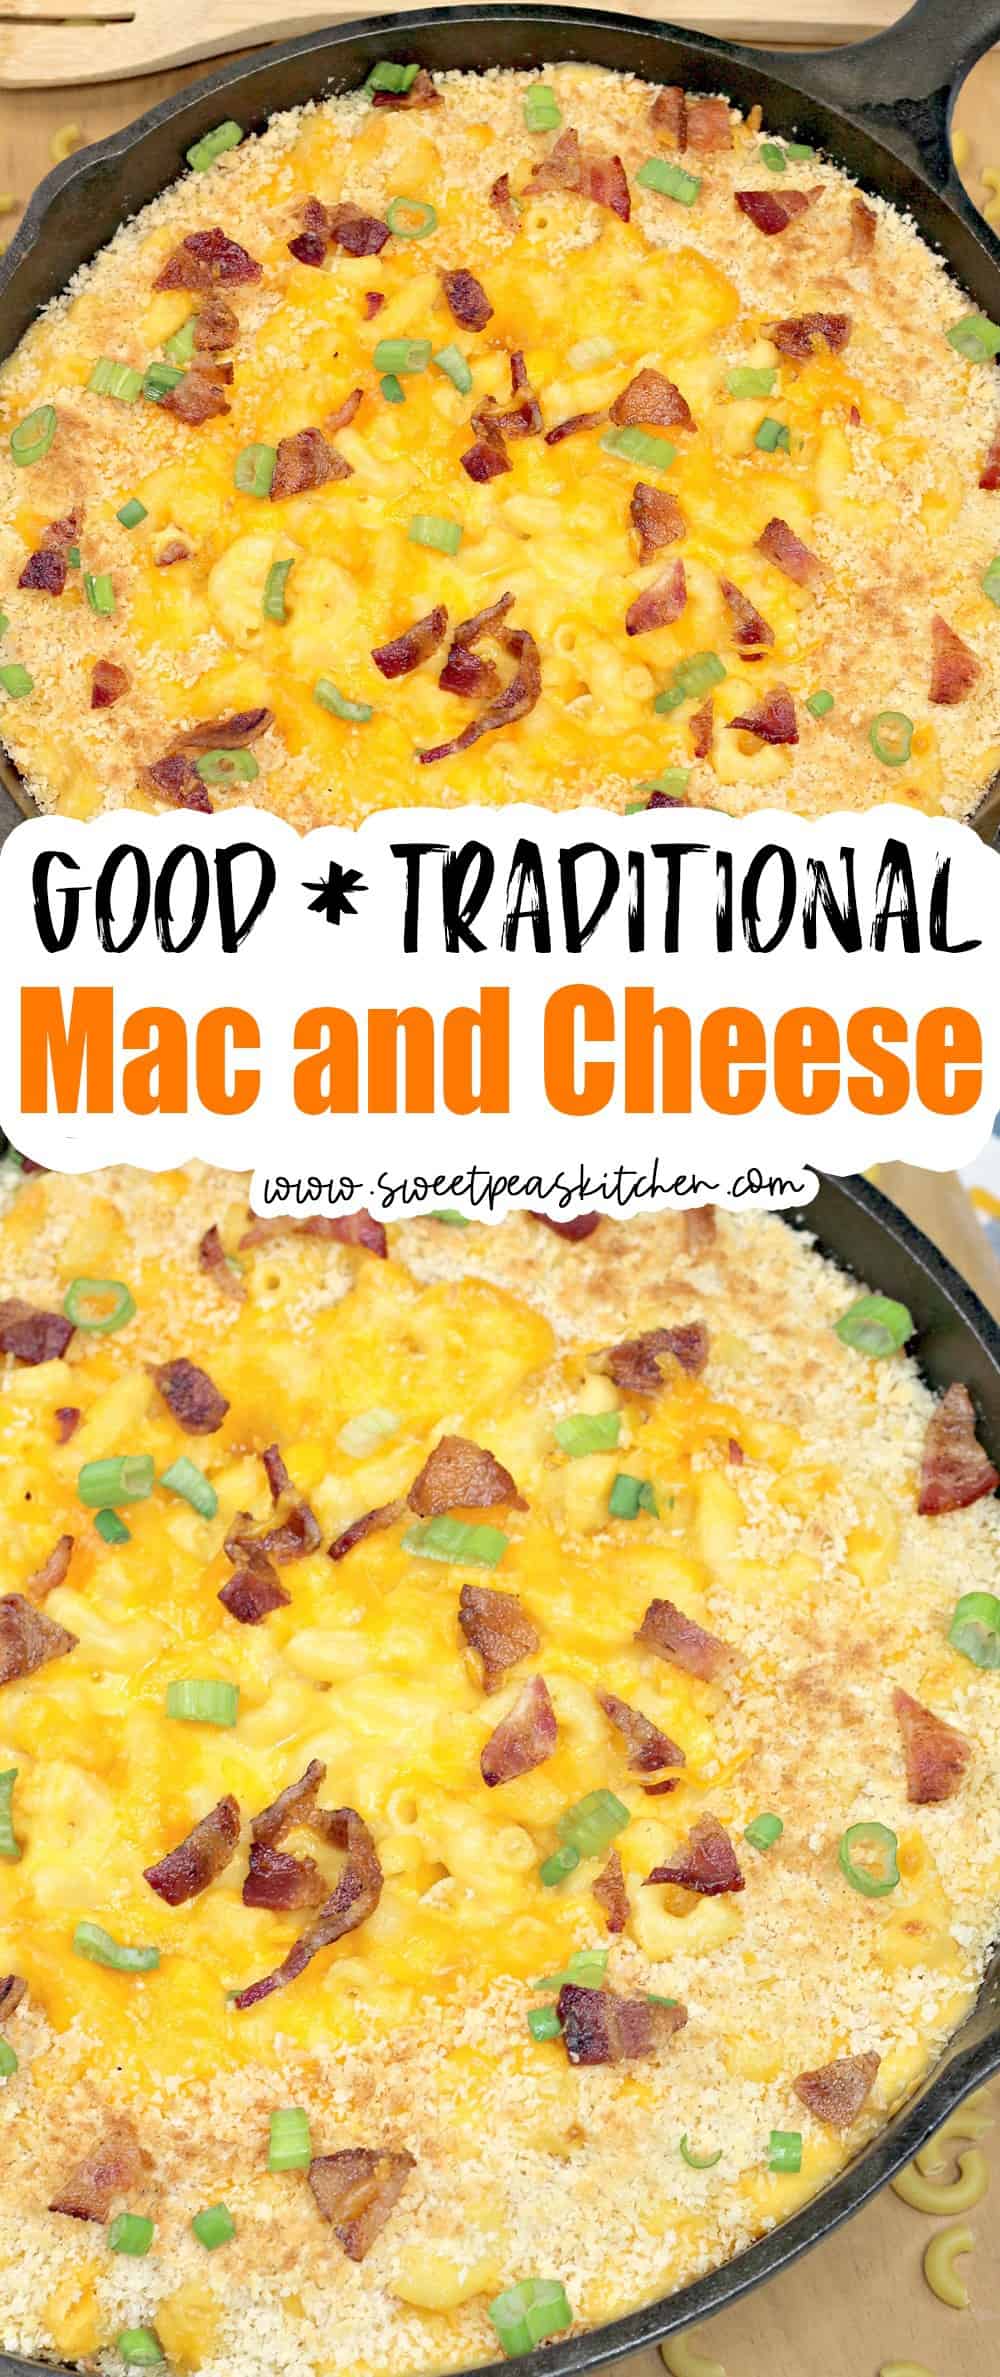 Traditional Mac and Cheese 